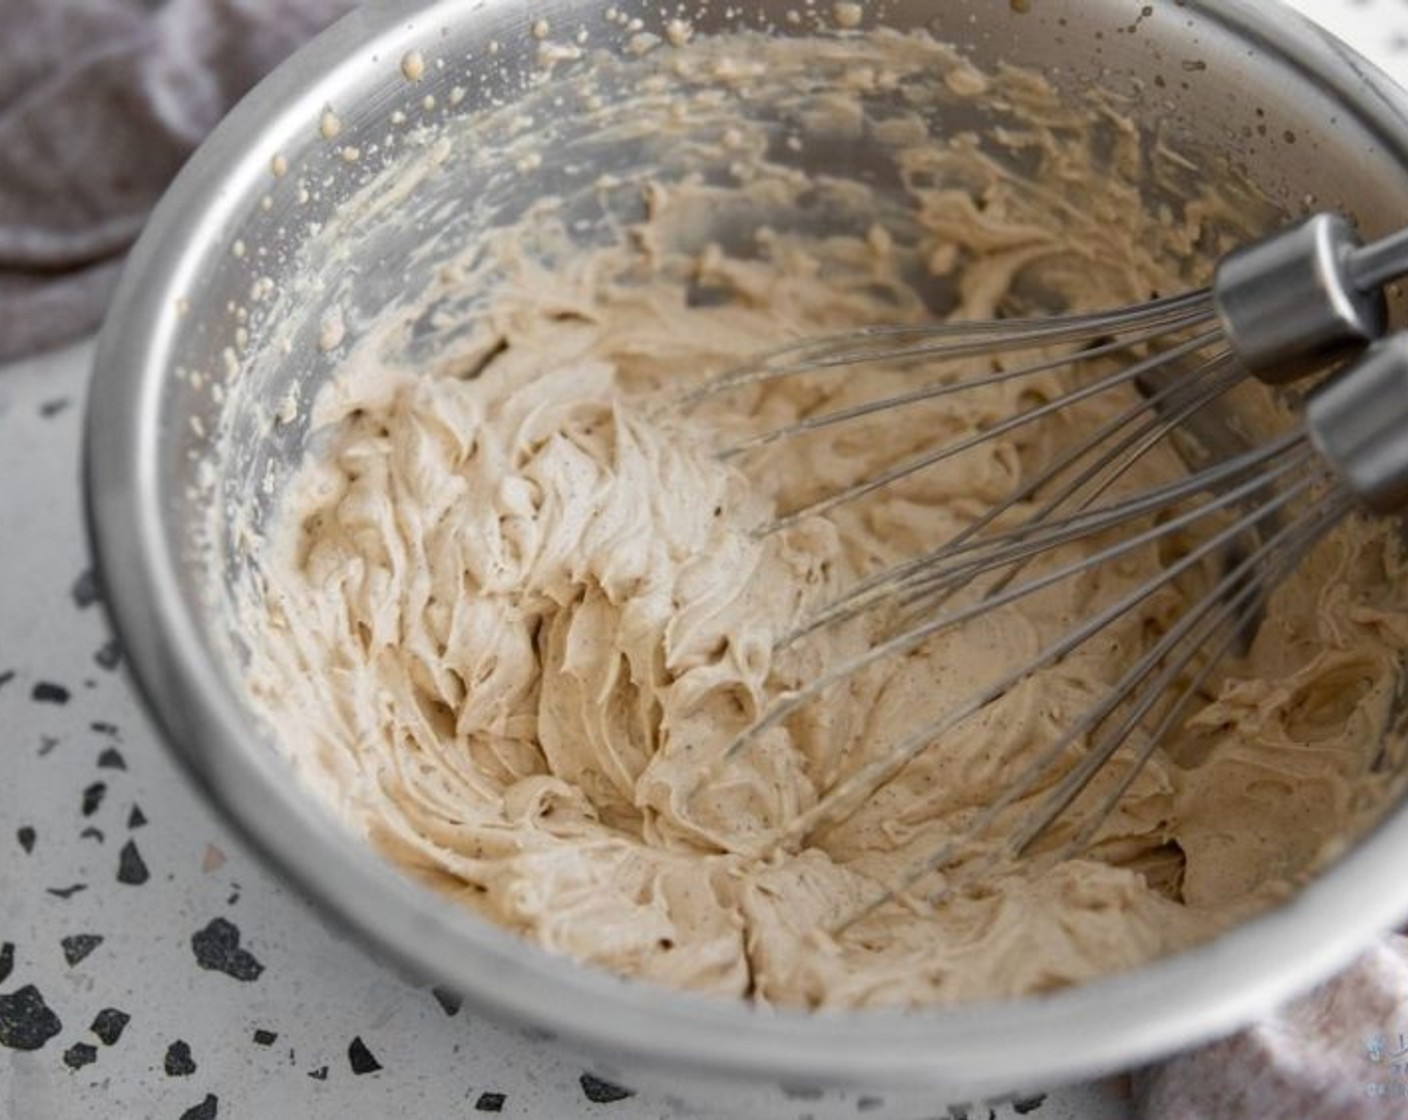 step 2 Strain the heavy cream into a mixing bowl and add Powdered Confectioners Sugar (1/3 cup) and whisk until stiff peaks. Refrigerate until ready to use.